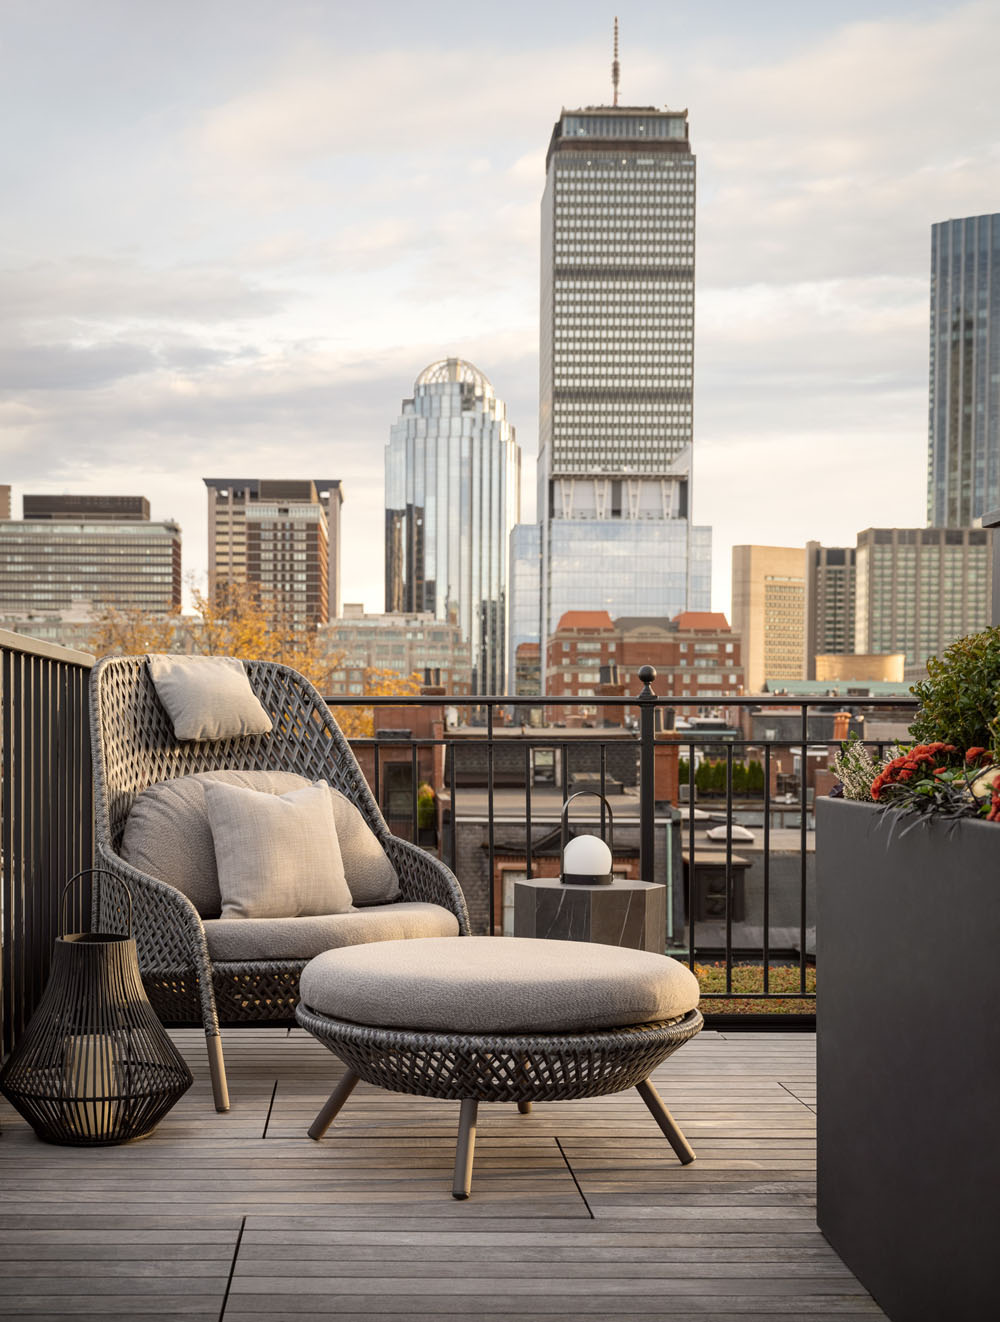 Rooftop Living Space with View of City Skyline